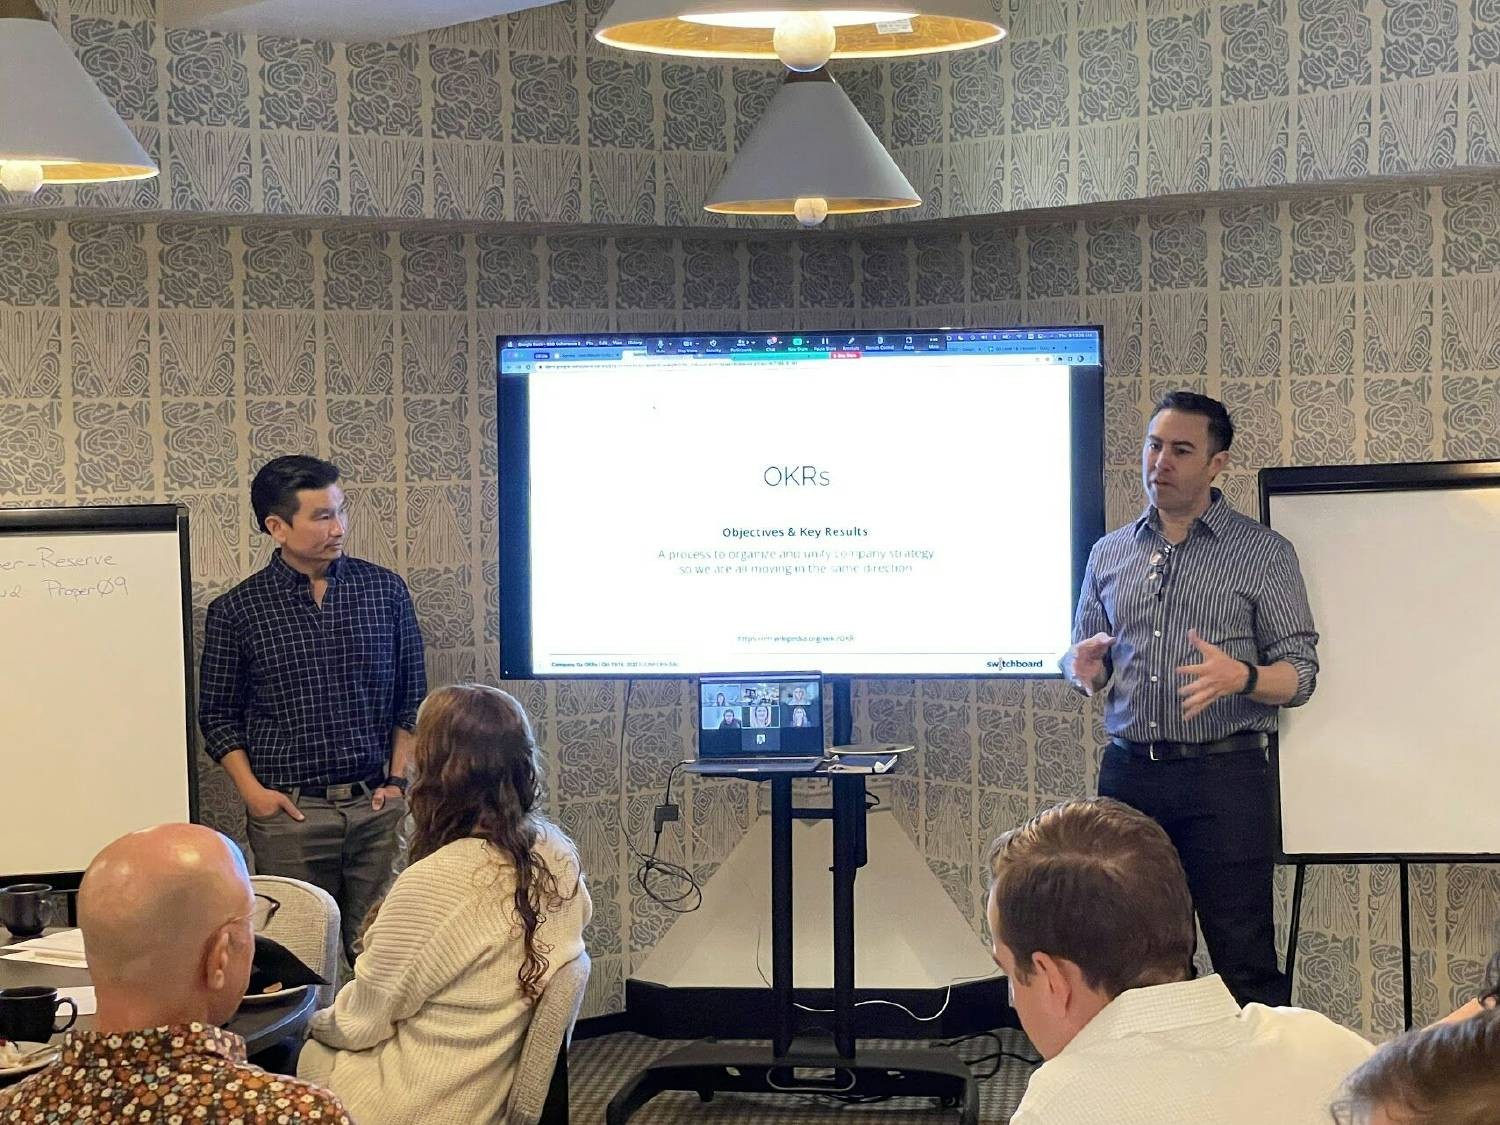 Our co-founders kicking off our quarterly OKR planning offsite by reminding us to 